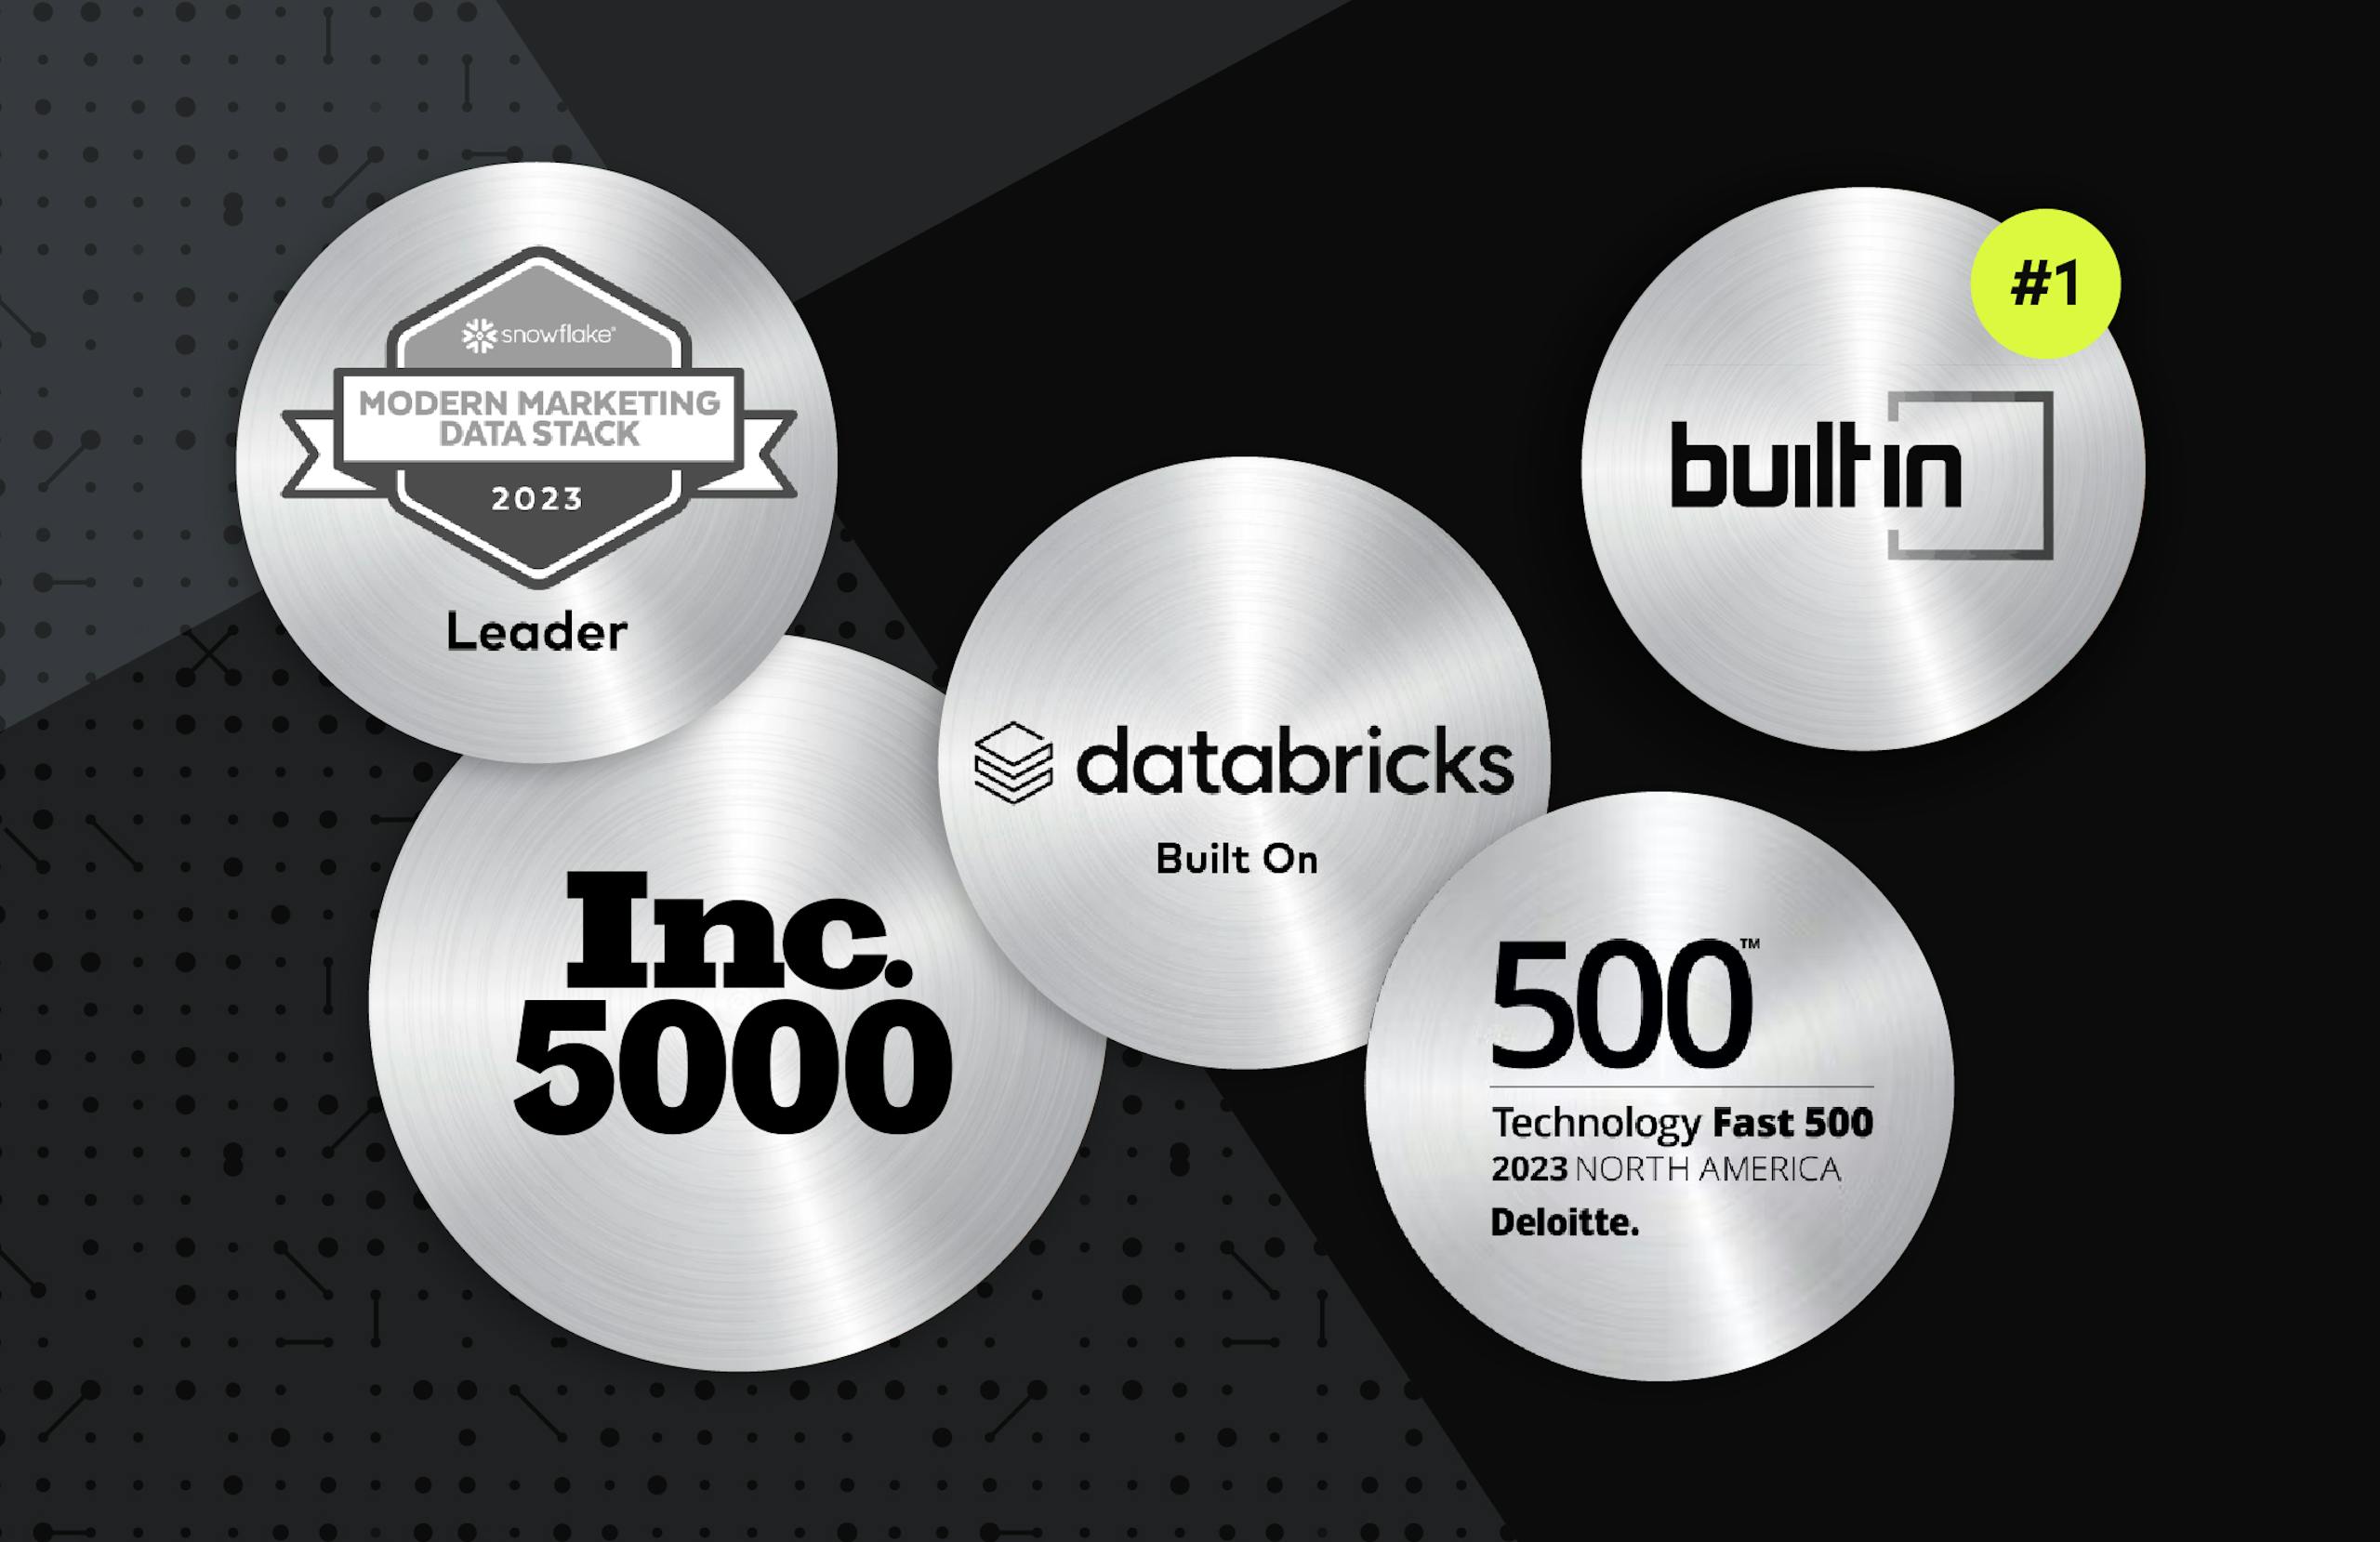 Collection of awards from Databricks, Inc5000, BuiltIn, and more.